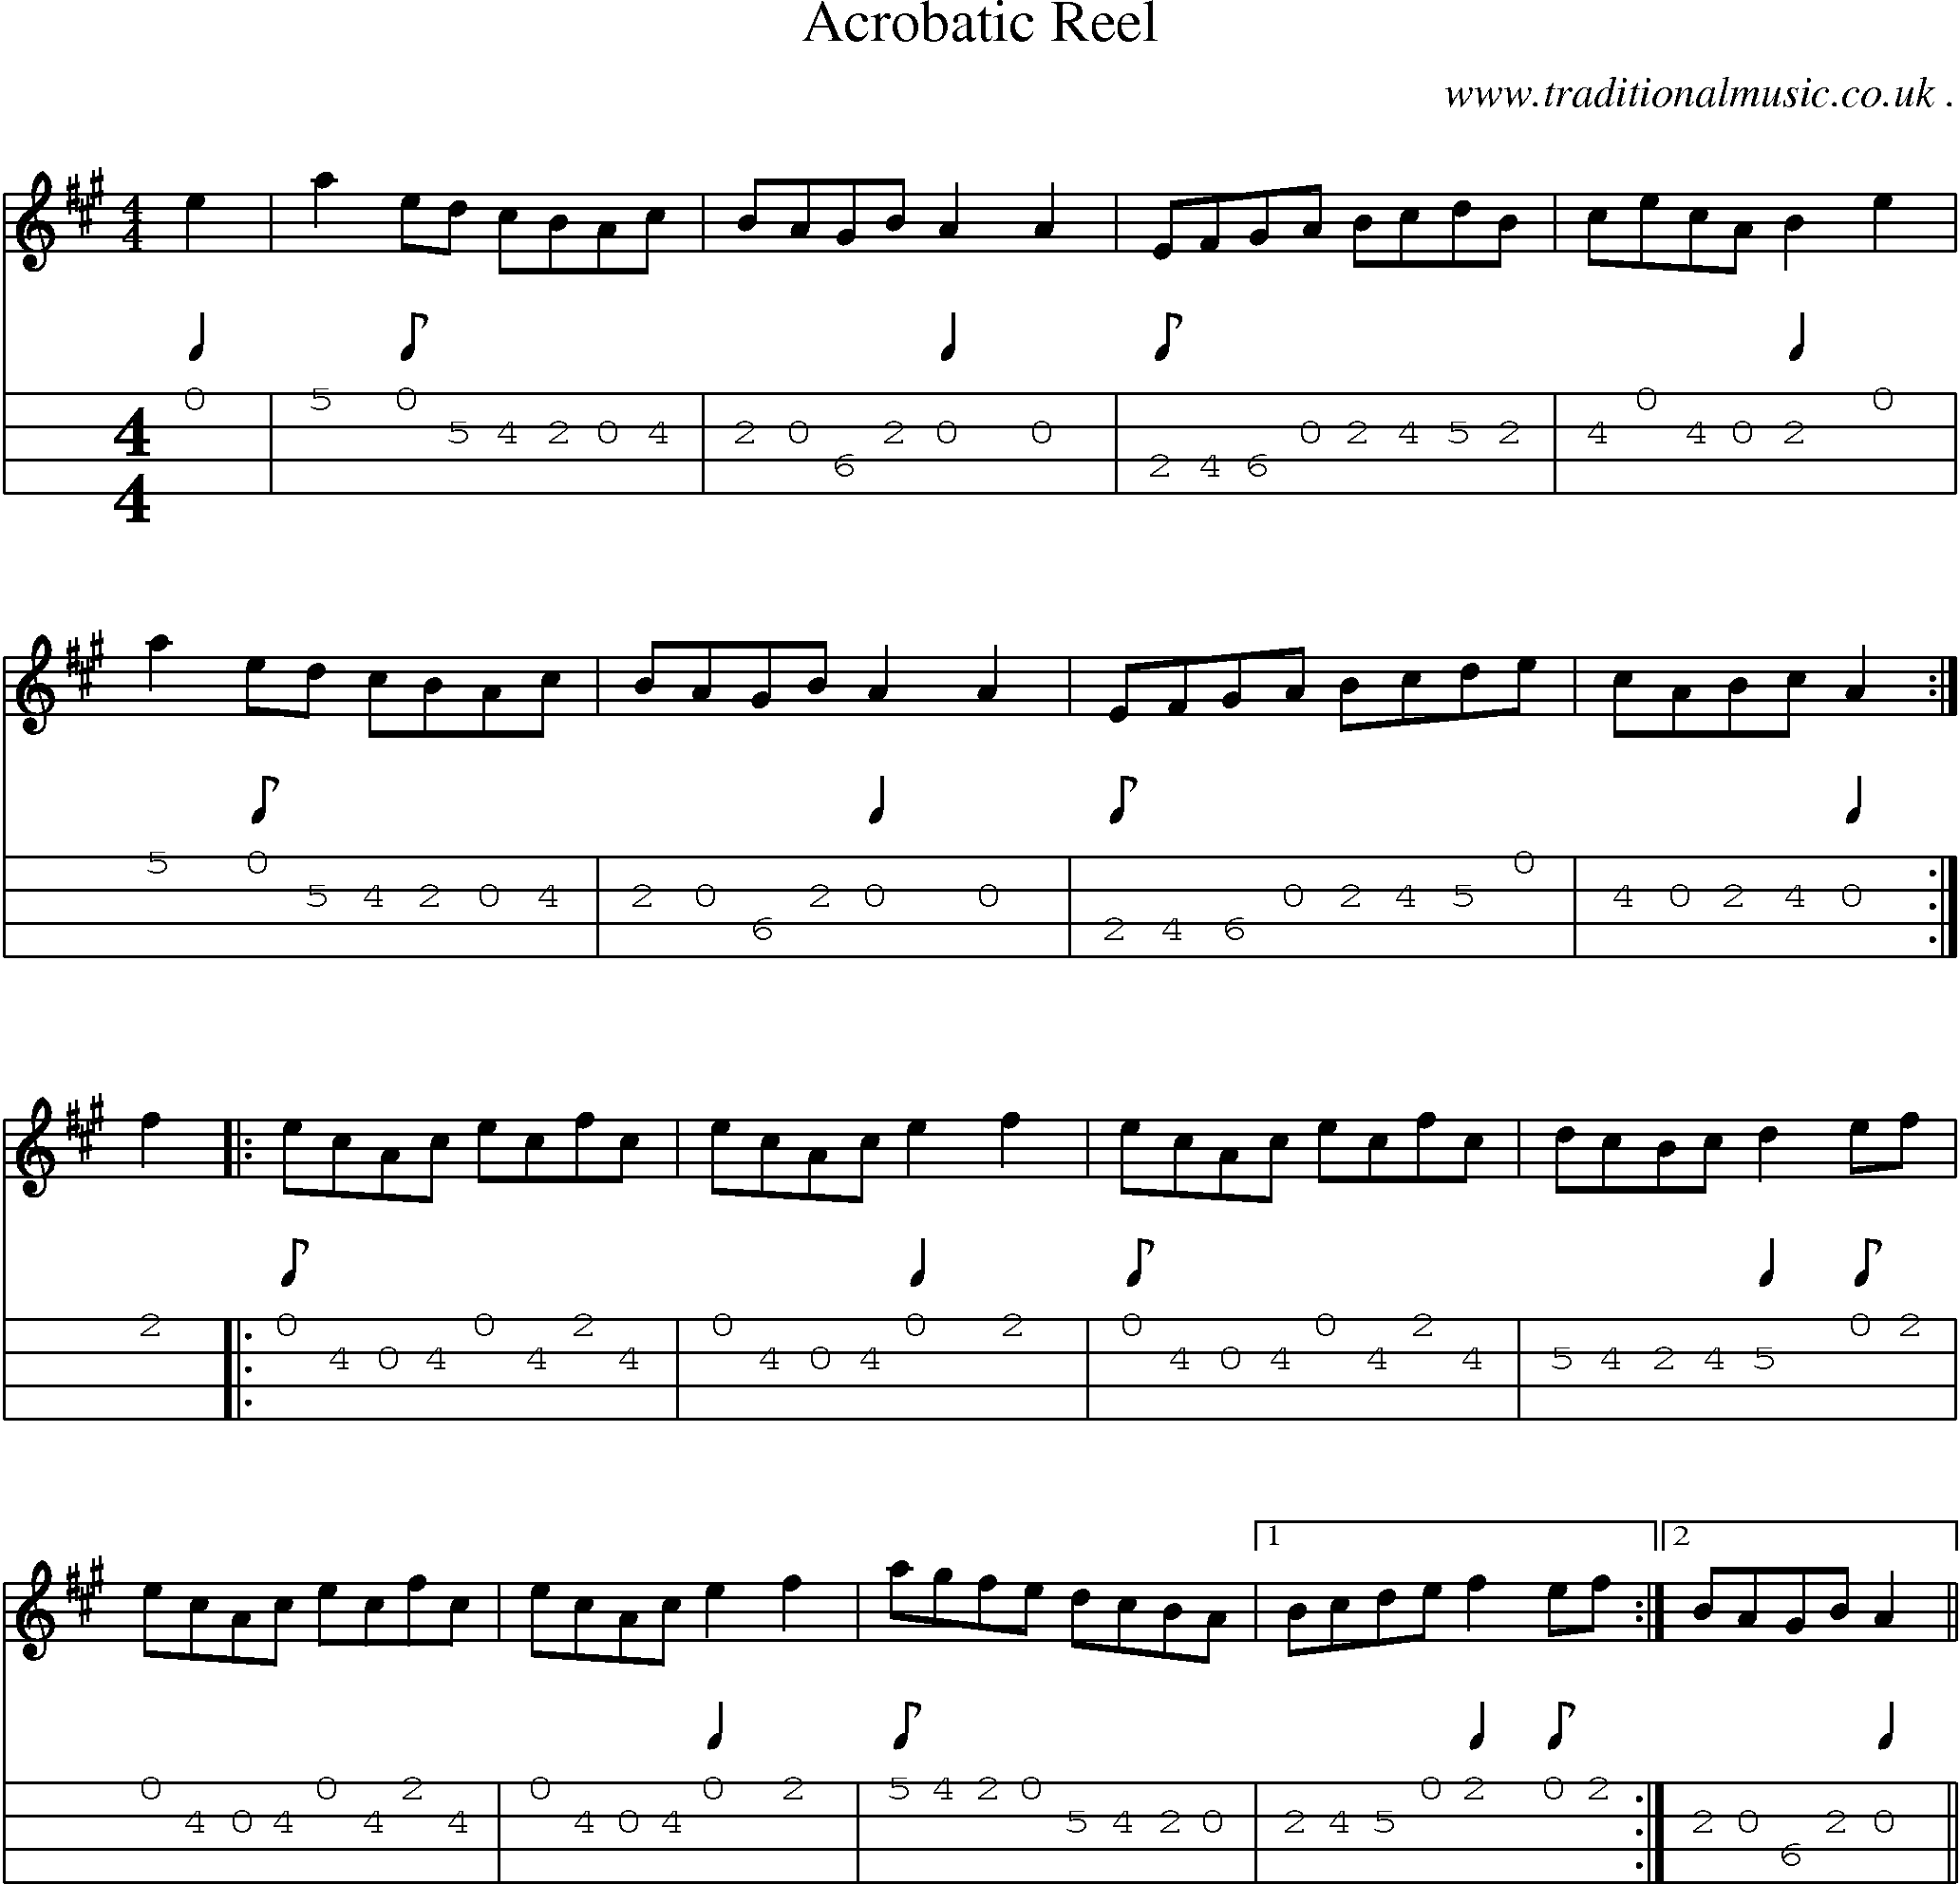 Music Score and Mandolin Tabs for Acrobatic Reel